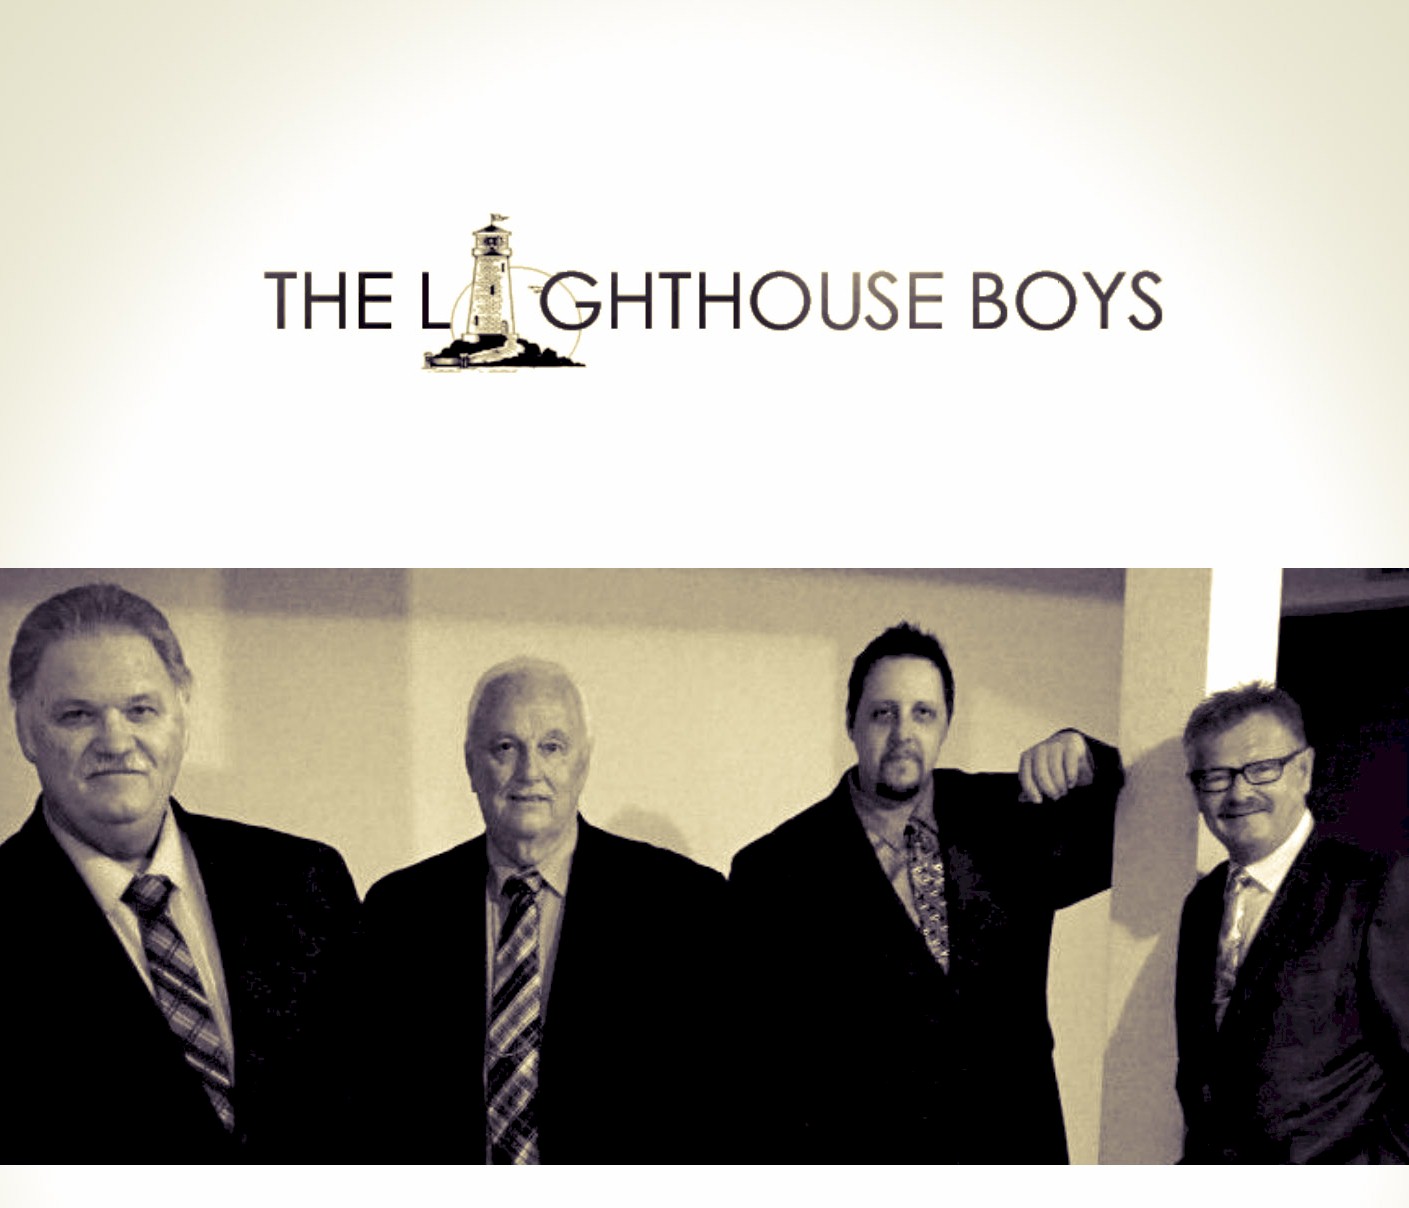 The Lighthouse Boys announce the departure of Lead Singer Randy Ivie